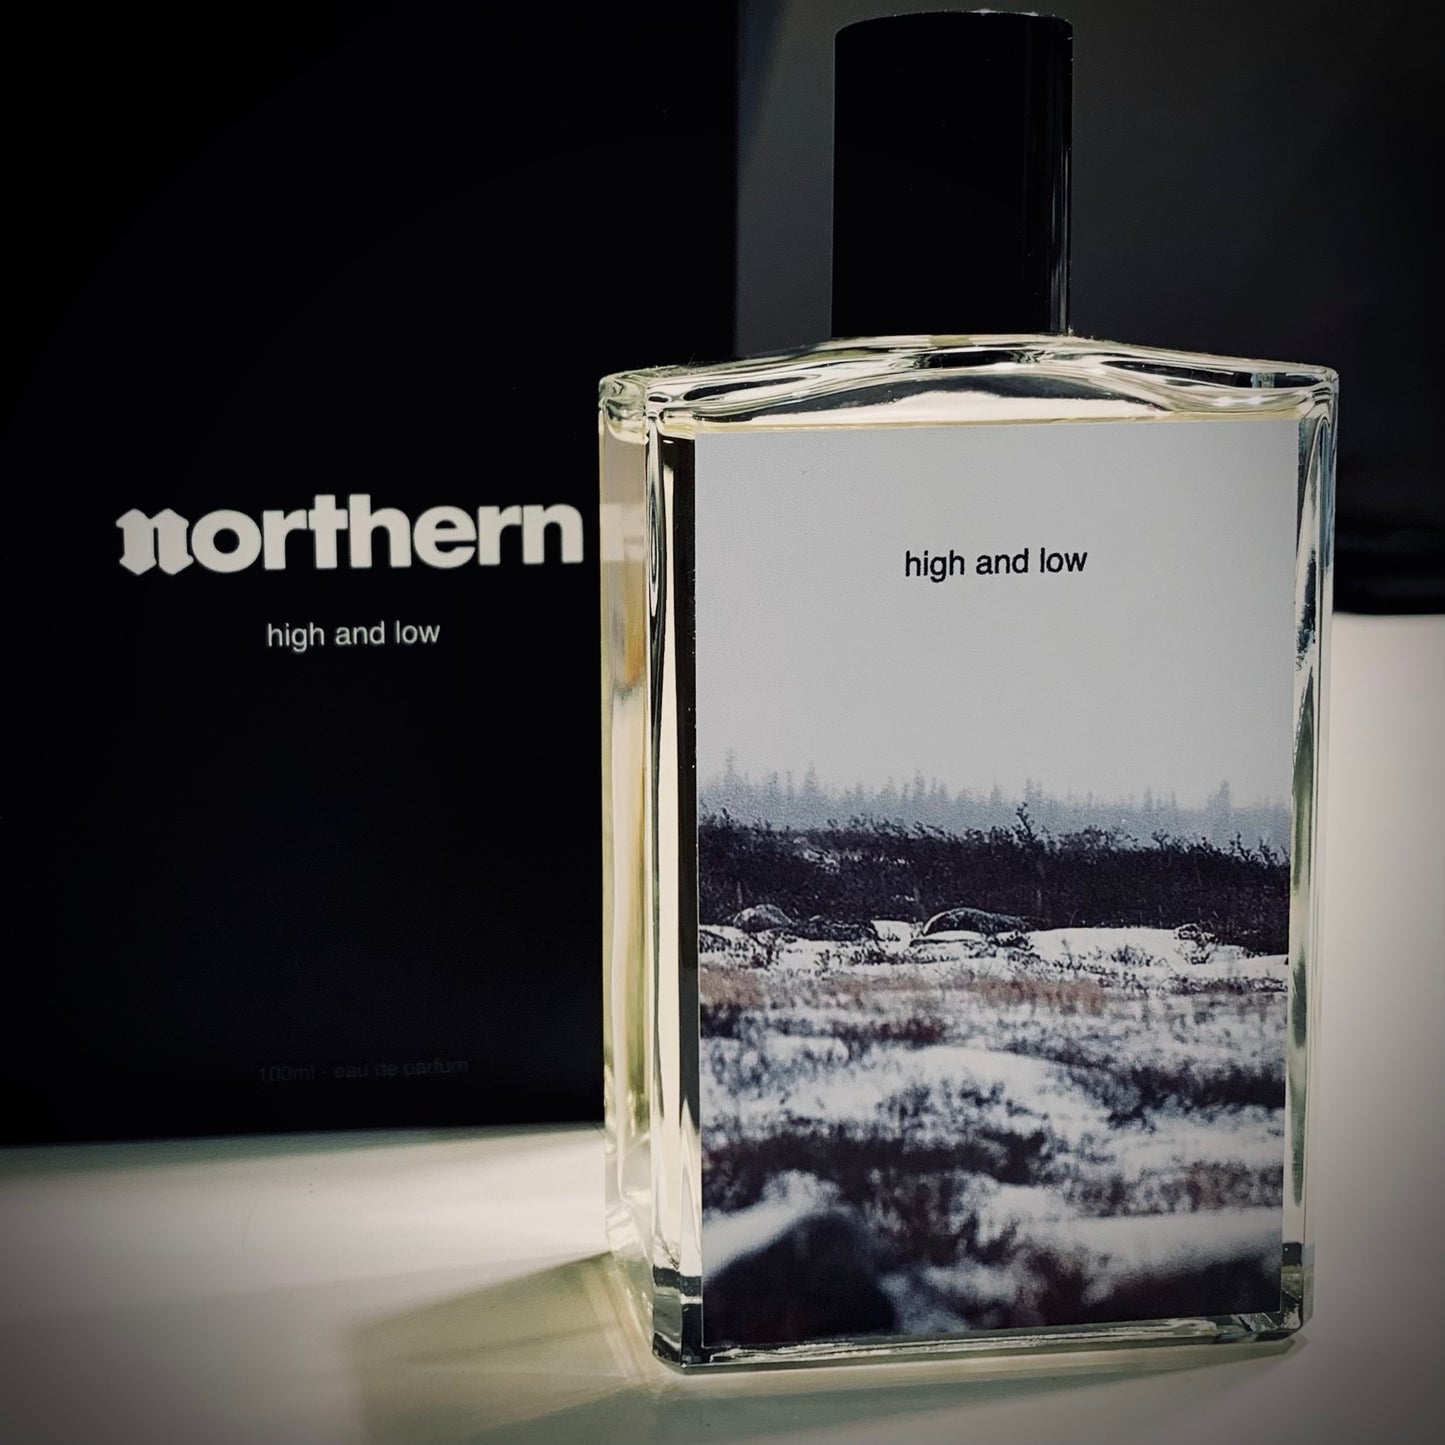 HIGH AND LOW PARFUM